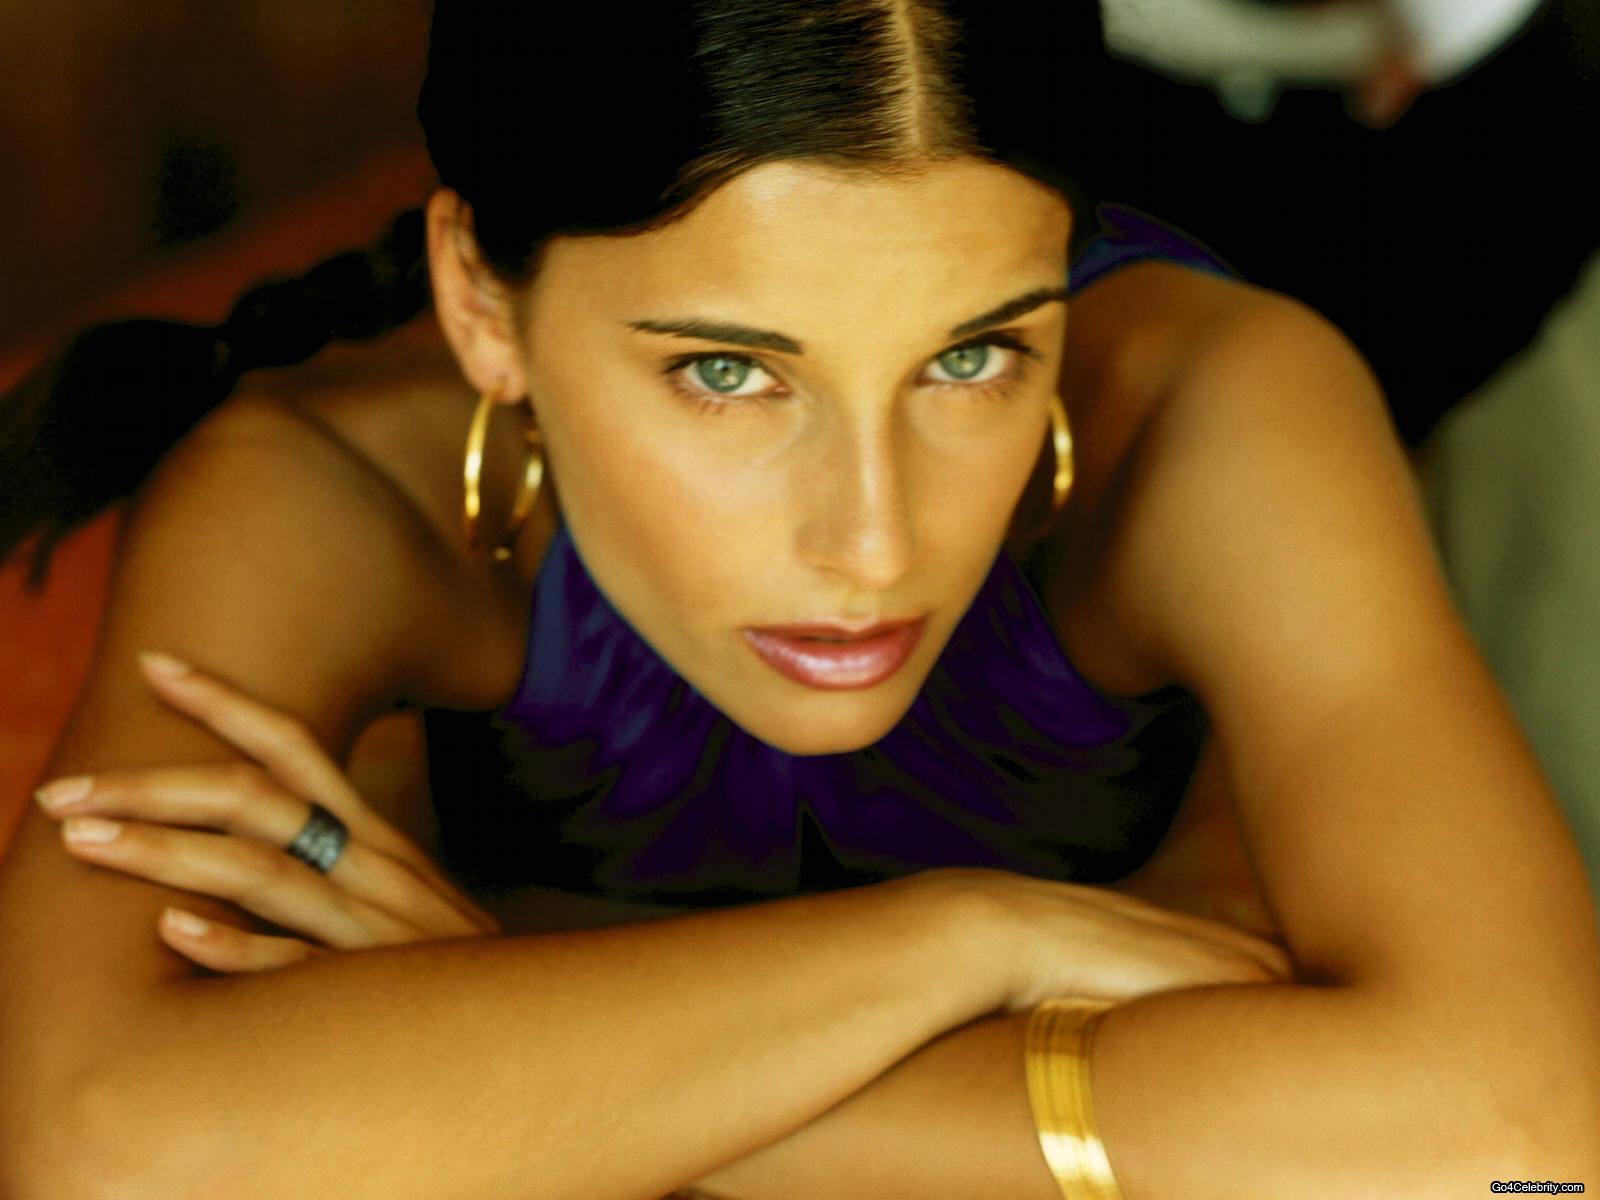 Nelly Furtado Awesome And Fabulous Image HD Wallpaper